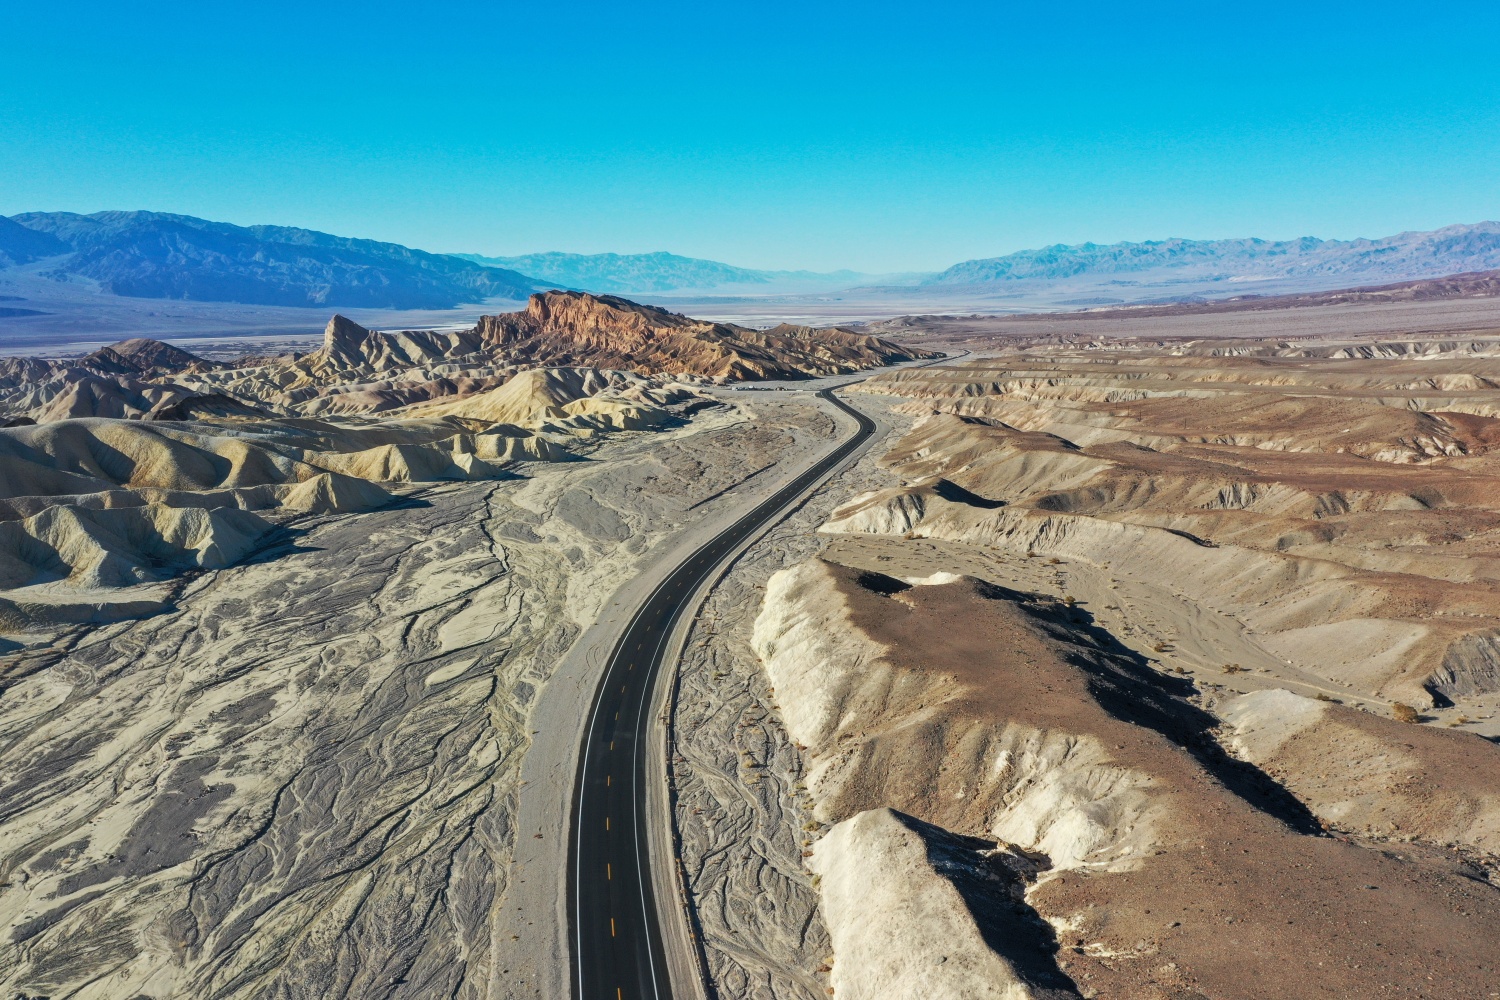 Man found in Death Valley National Park after his car runs out of